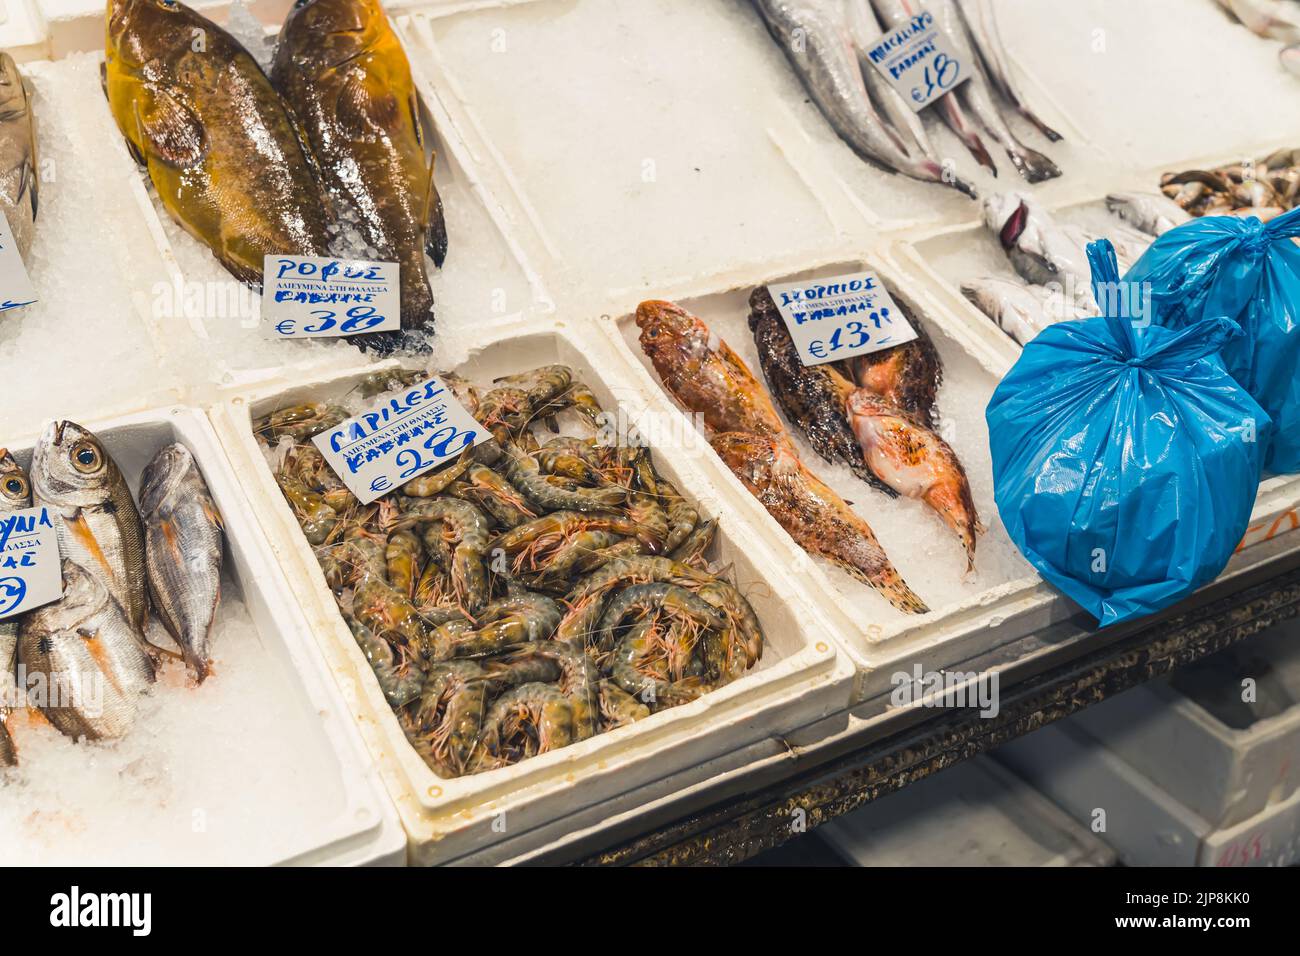 Freshly caught fish and shellfish displayed on ice. Fish market. Mediterranean cuisine concept. Two blue plastic bags in the corner. High quality photo Stock Photo